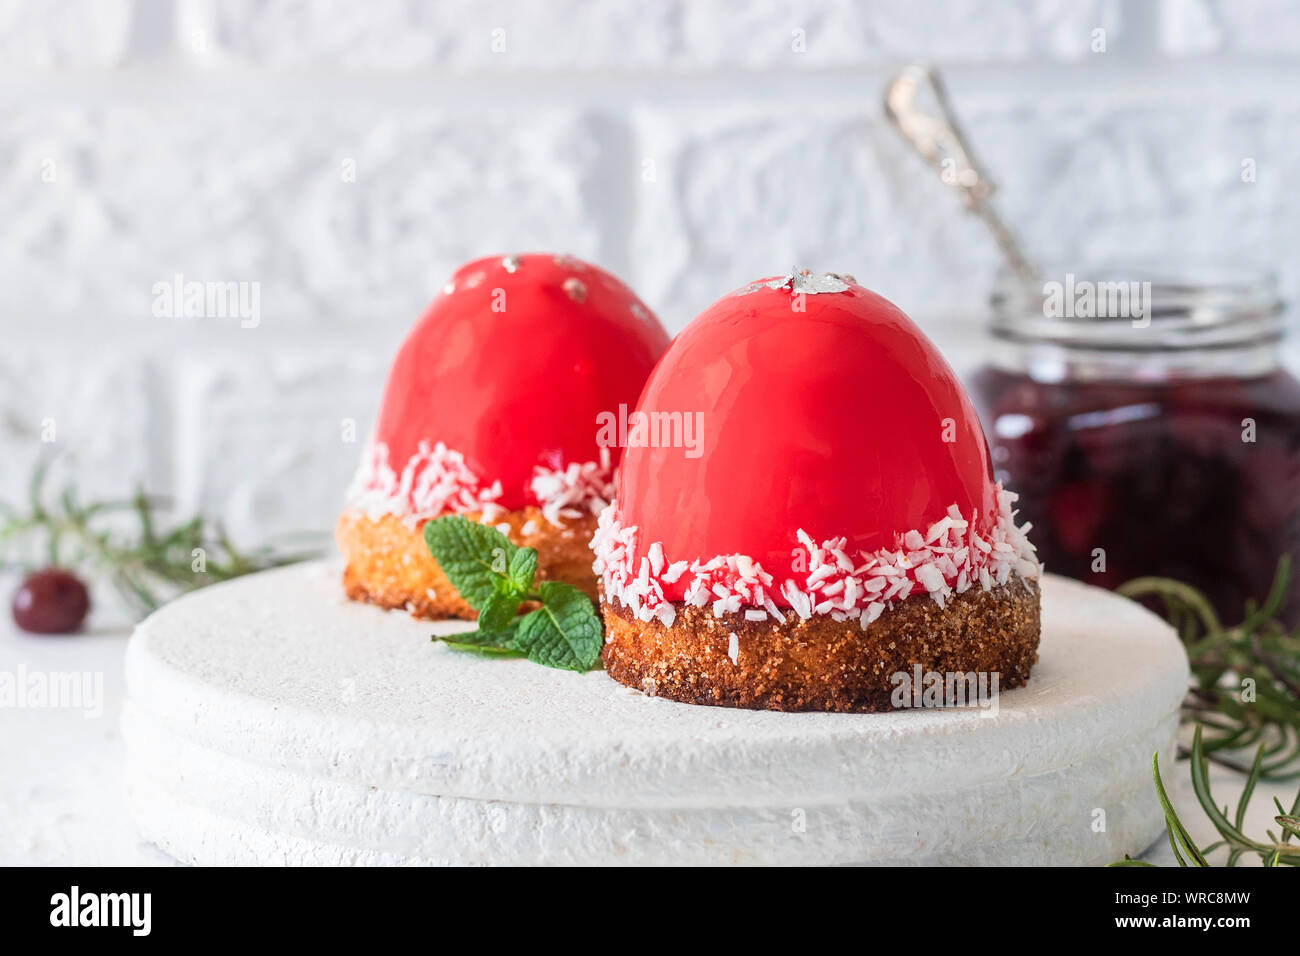 Fashionable mousse cake with mirror glaze and cherry filling on a pillow of coconut cookies with coconut flakes. Modern dessert. Stock Photo